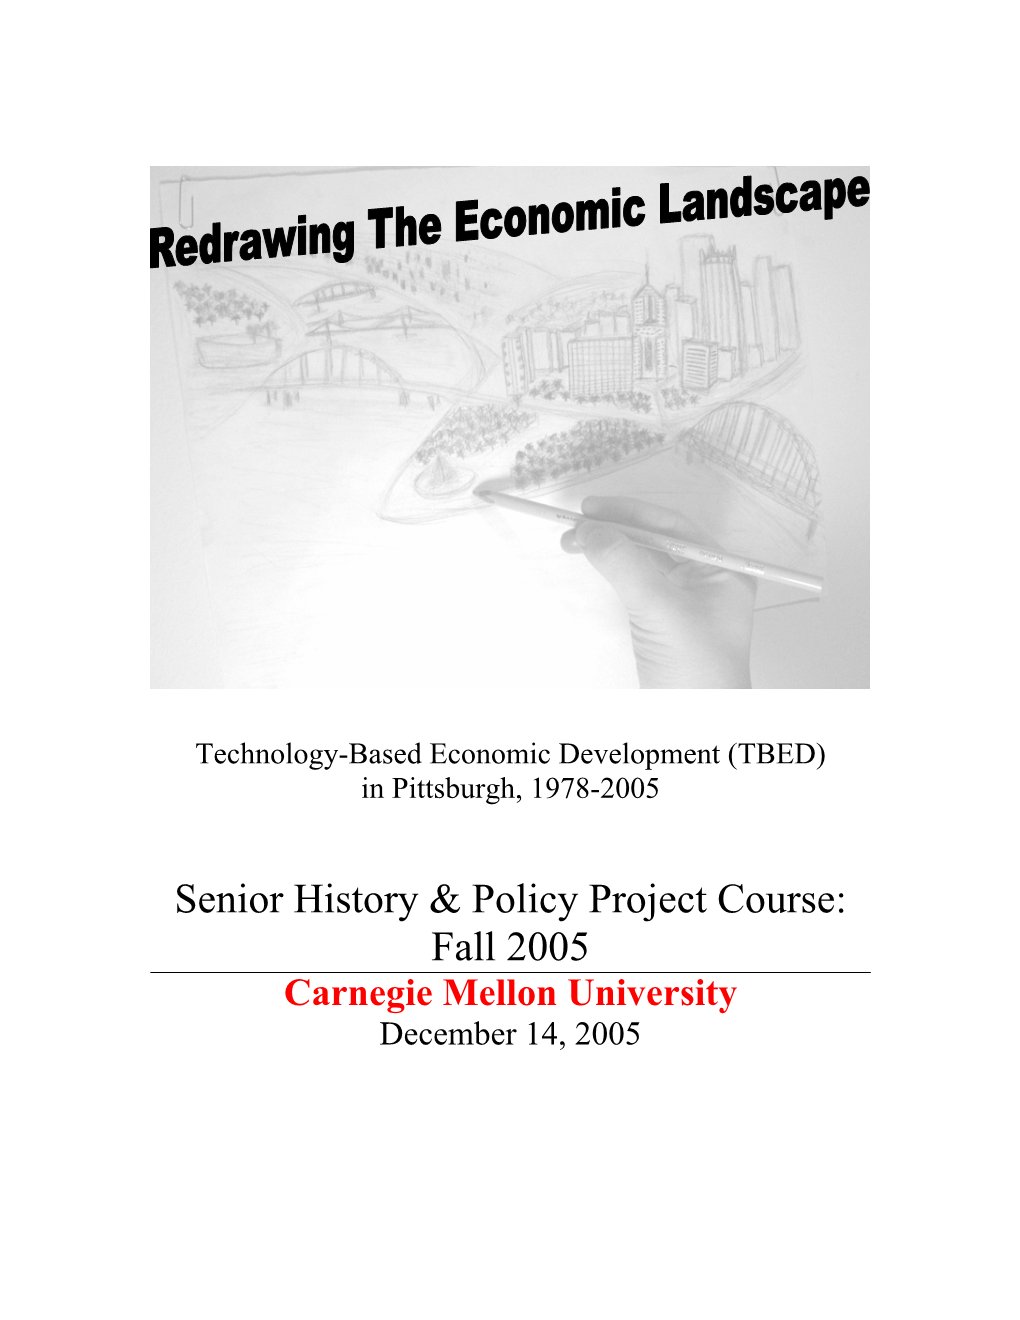 2005: Redrawing the Economic Landscape